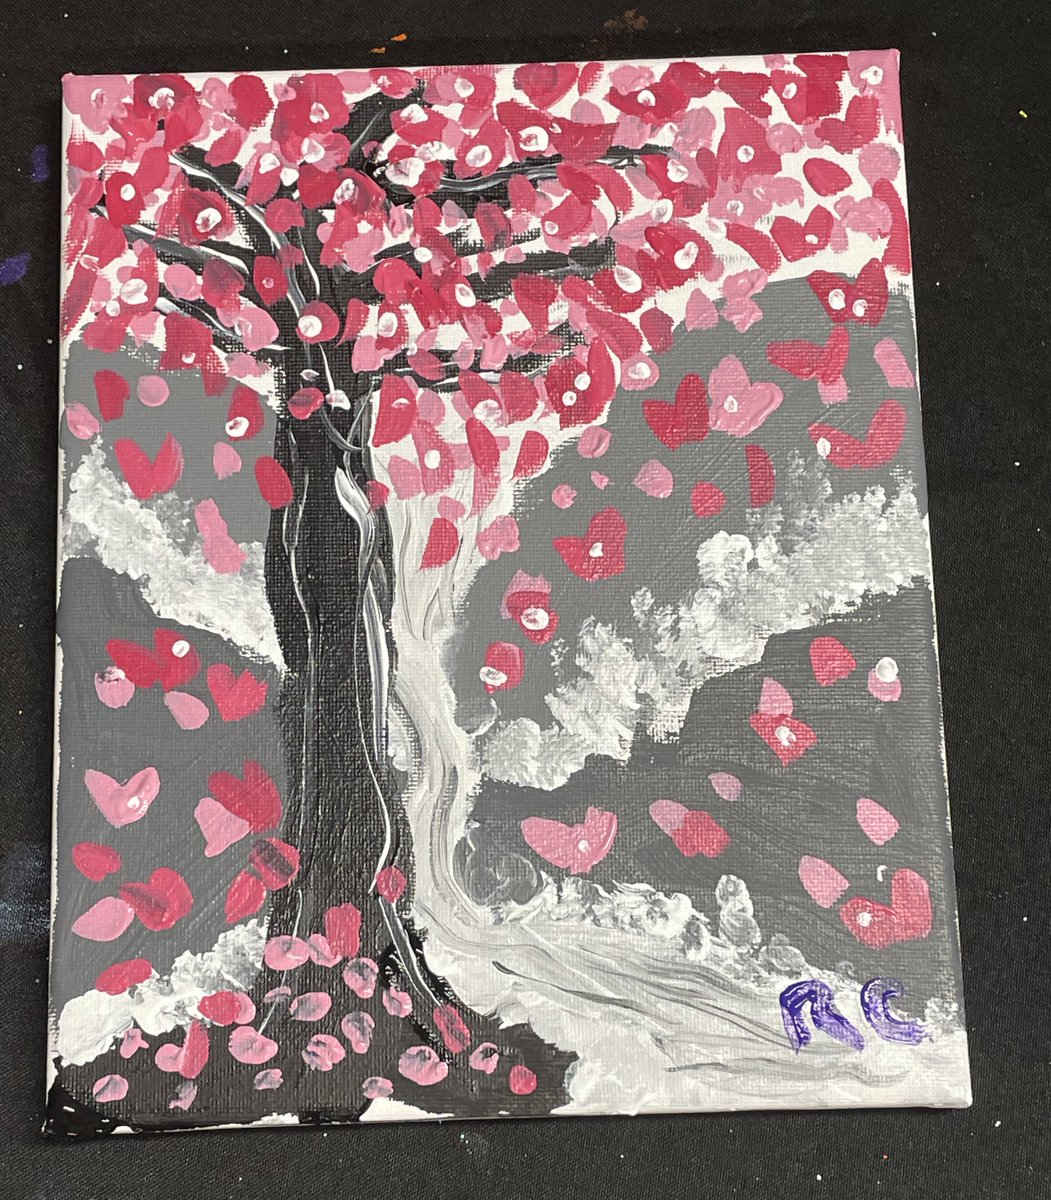 #HappyValentineDay and #HappyGalentinesDay to all my #GITwitter friends and #ACGfamily ! 

Attempt at painting a 🌸tree and ❤️💕